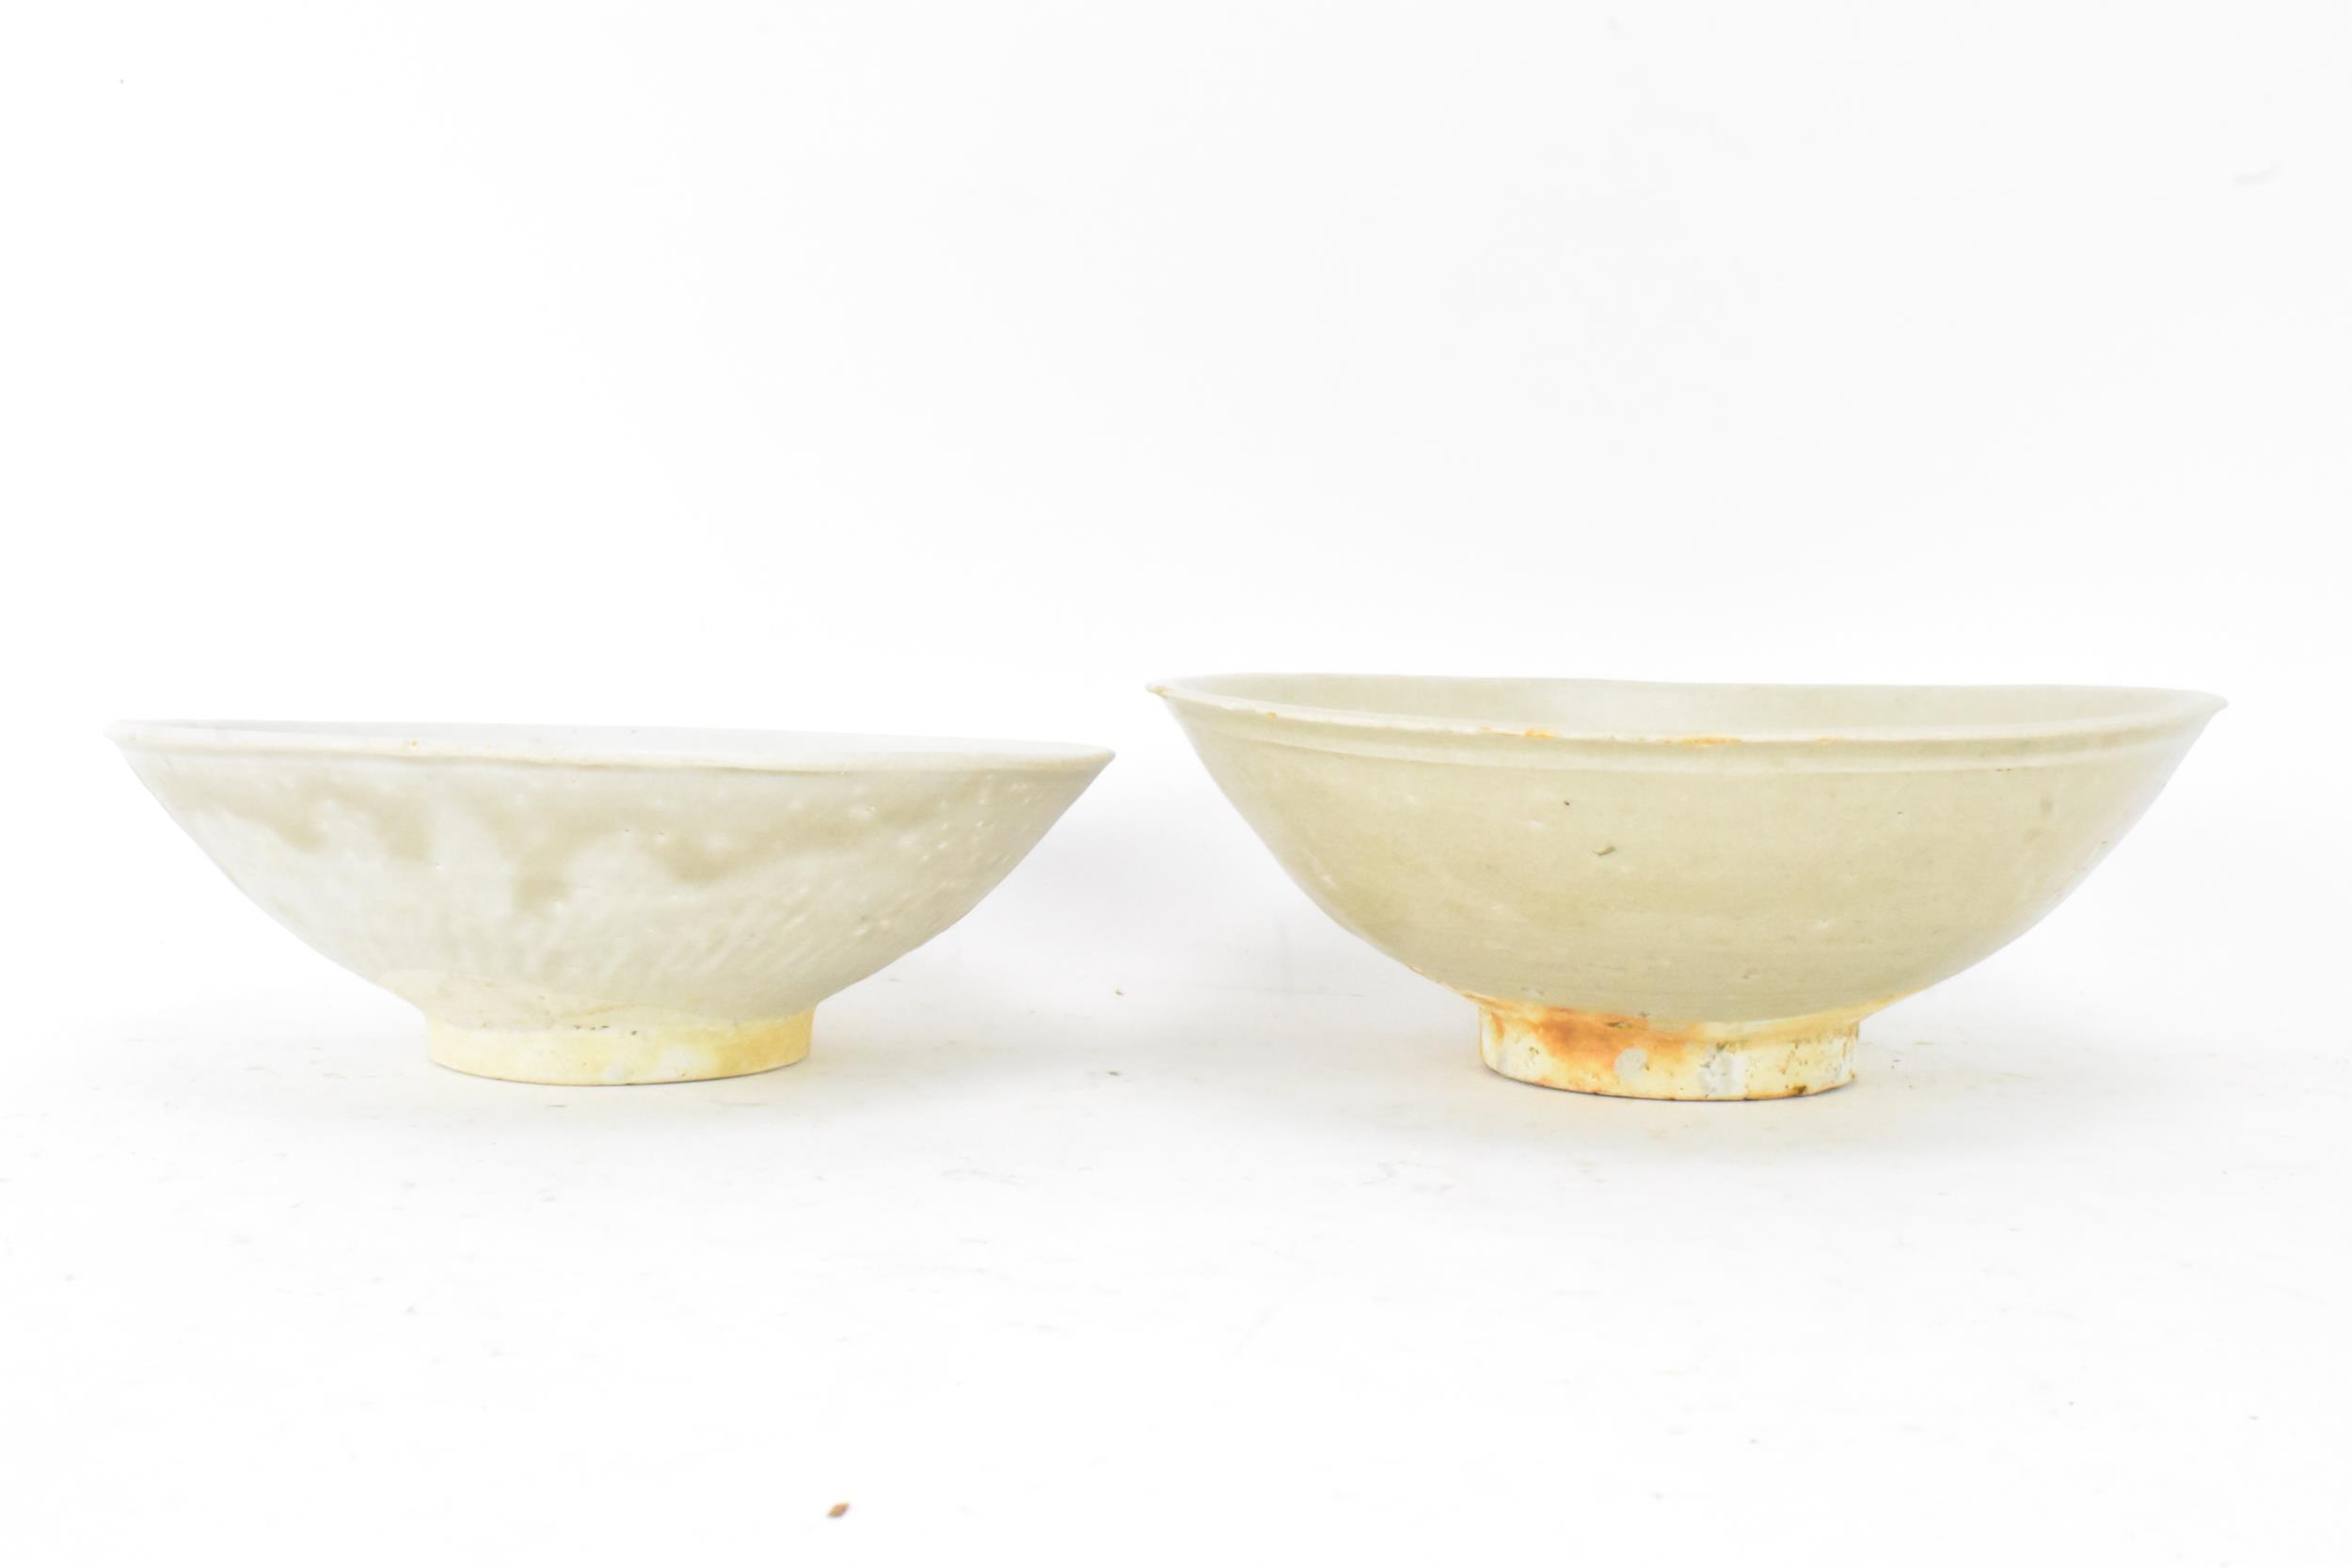 Two Chinese Song dynasty (960-1279) celadon glazed bowls, from a shipwreck in the South China